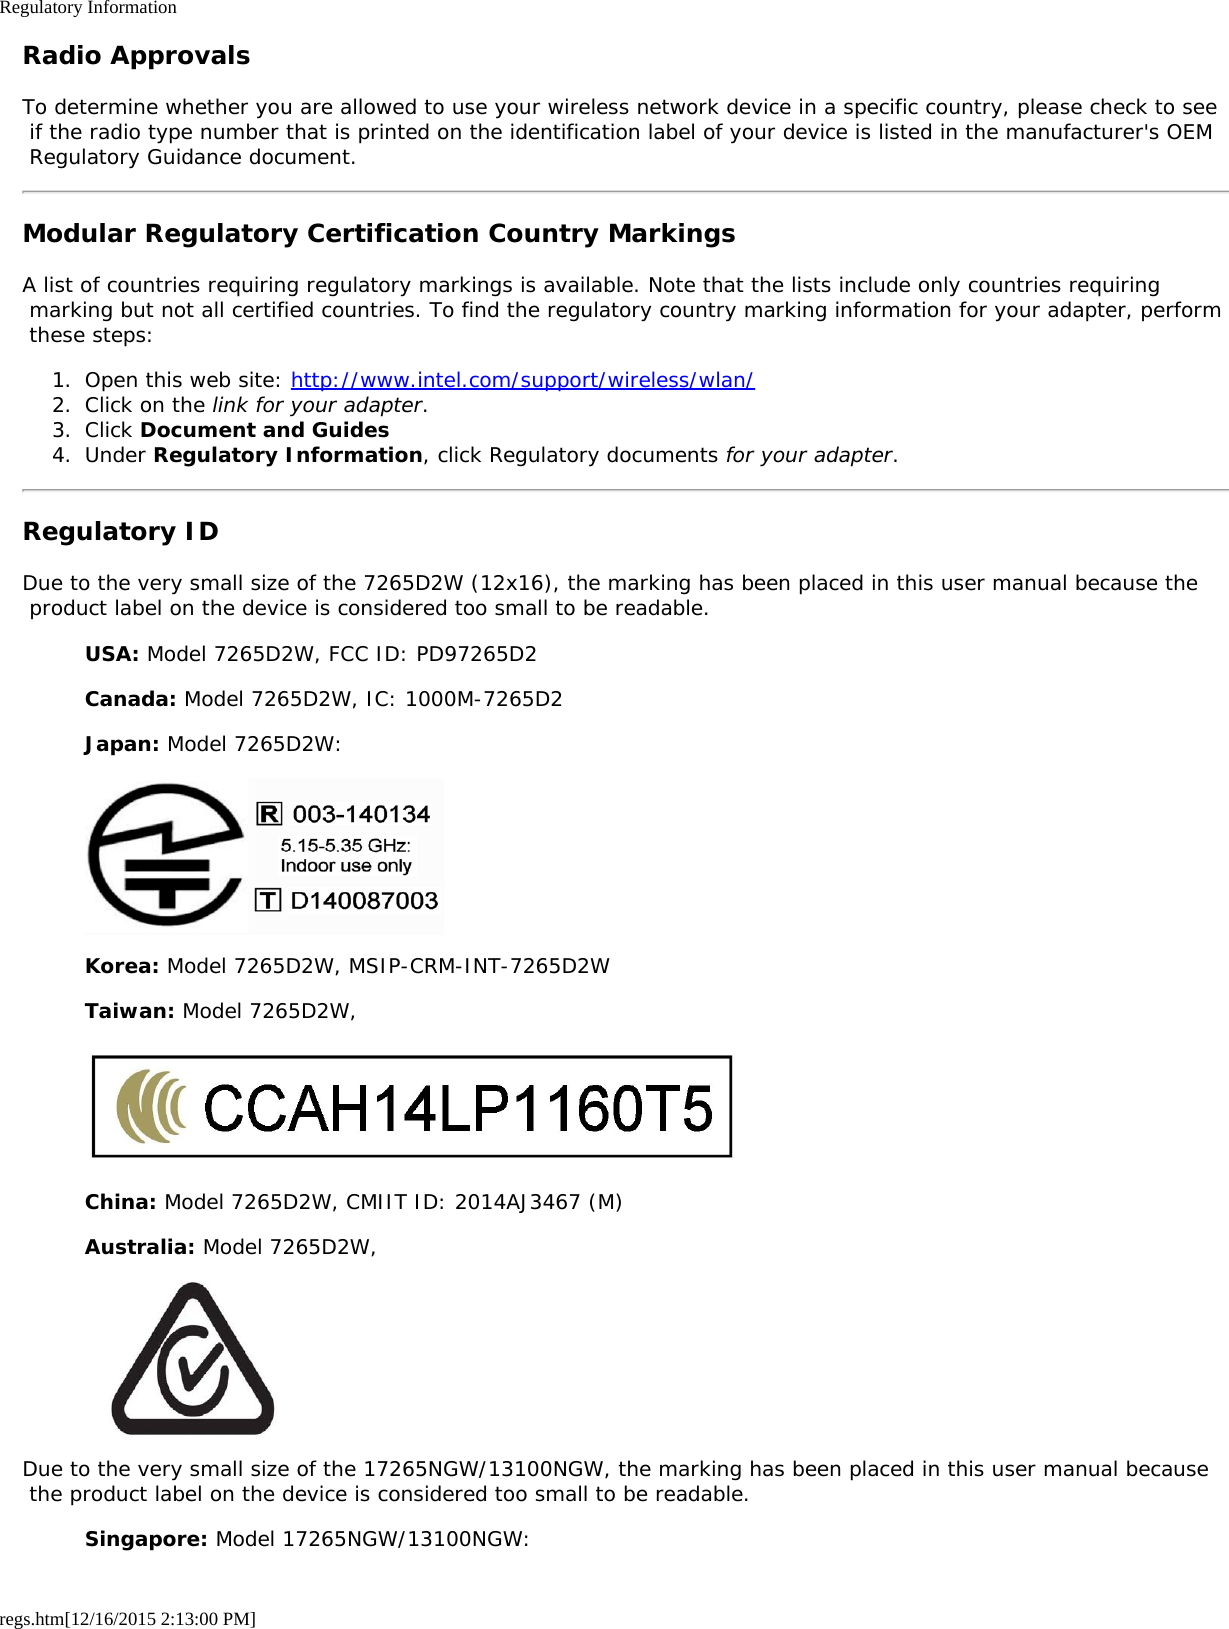 Regulatory Informationregs.htm[12/16/2015 2:13:00 PM]Radio ApprovalsTo determine whether you are allowed to use your wireless network device in a specific country, please check to see if the radio type number that is printed on the identification label of your device is listed in the manufacturer&apos;s OEM Regulatory Guidance document.Modular Regulatory Certification Country MarkingsA list of countries requiring regulatory markings is available. Note that the lists include only countries requiring marking but not all certified countries. To find the regulatory country marking information for your adapter, perform these steps:1.  Open this web site: http://www.intel.com/support/wireless/wlan/2.  Click on the link for your adapter.3.  Click Document and Guides4.  Under Regulatory Information, click Regulatory documents for your adapter.Regulatory IDDue to the very small size of the 7265D2W (12x16), the marking has been placed in this user manual because the product label on the device is considered too small to be readable.USA: Model 7265D2W, FCC ID: PD97265D2Canada: Model 7265D2W, IC: 1000M-7265D2Japan: Model 7265D2W:Korea: Model 7265D2W, MSIP-CRM-INT-7265D2WTaiwan: Model 7265D2W,China: Model 7265D2W, CMIIT ID: 2014AJ3467 (M)Australia: Model 7265D2W,Due to the very small size of the 17265NGW/13100NGW, the marking has been placed in this user manual because the product label on the device is considered too small to be readable.Singapore: Model 17265NGW/13100NGW: